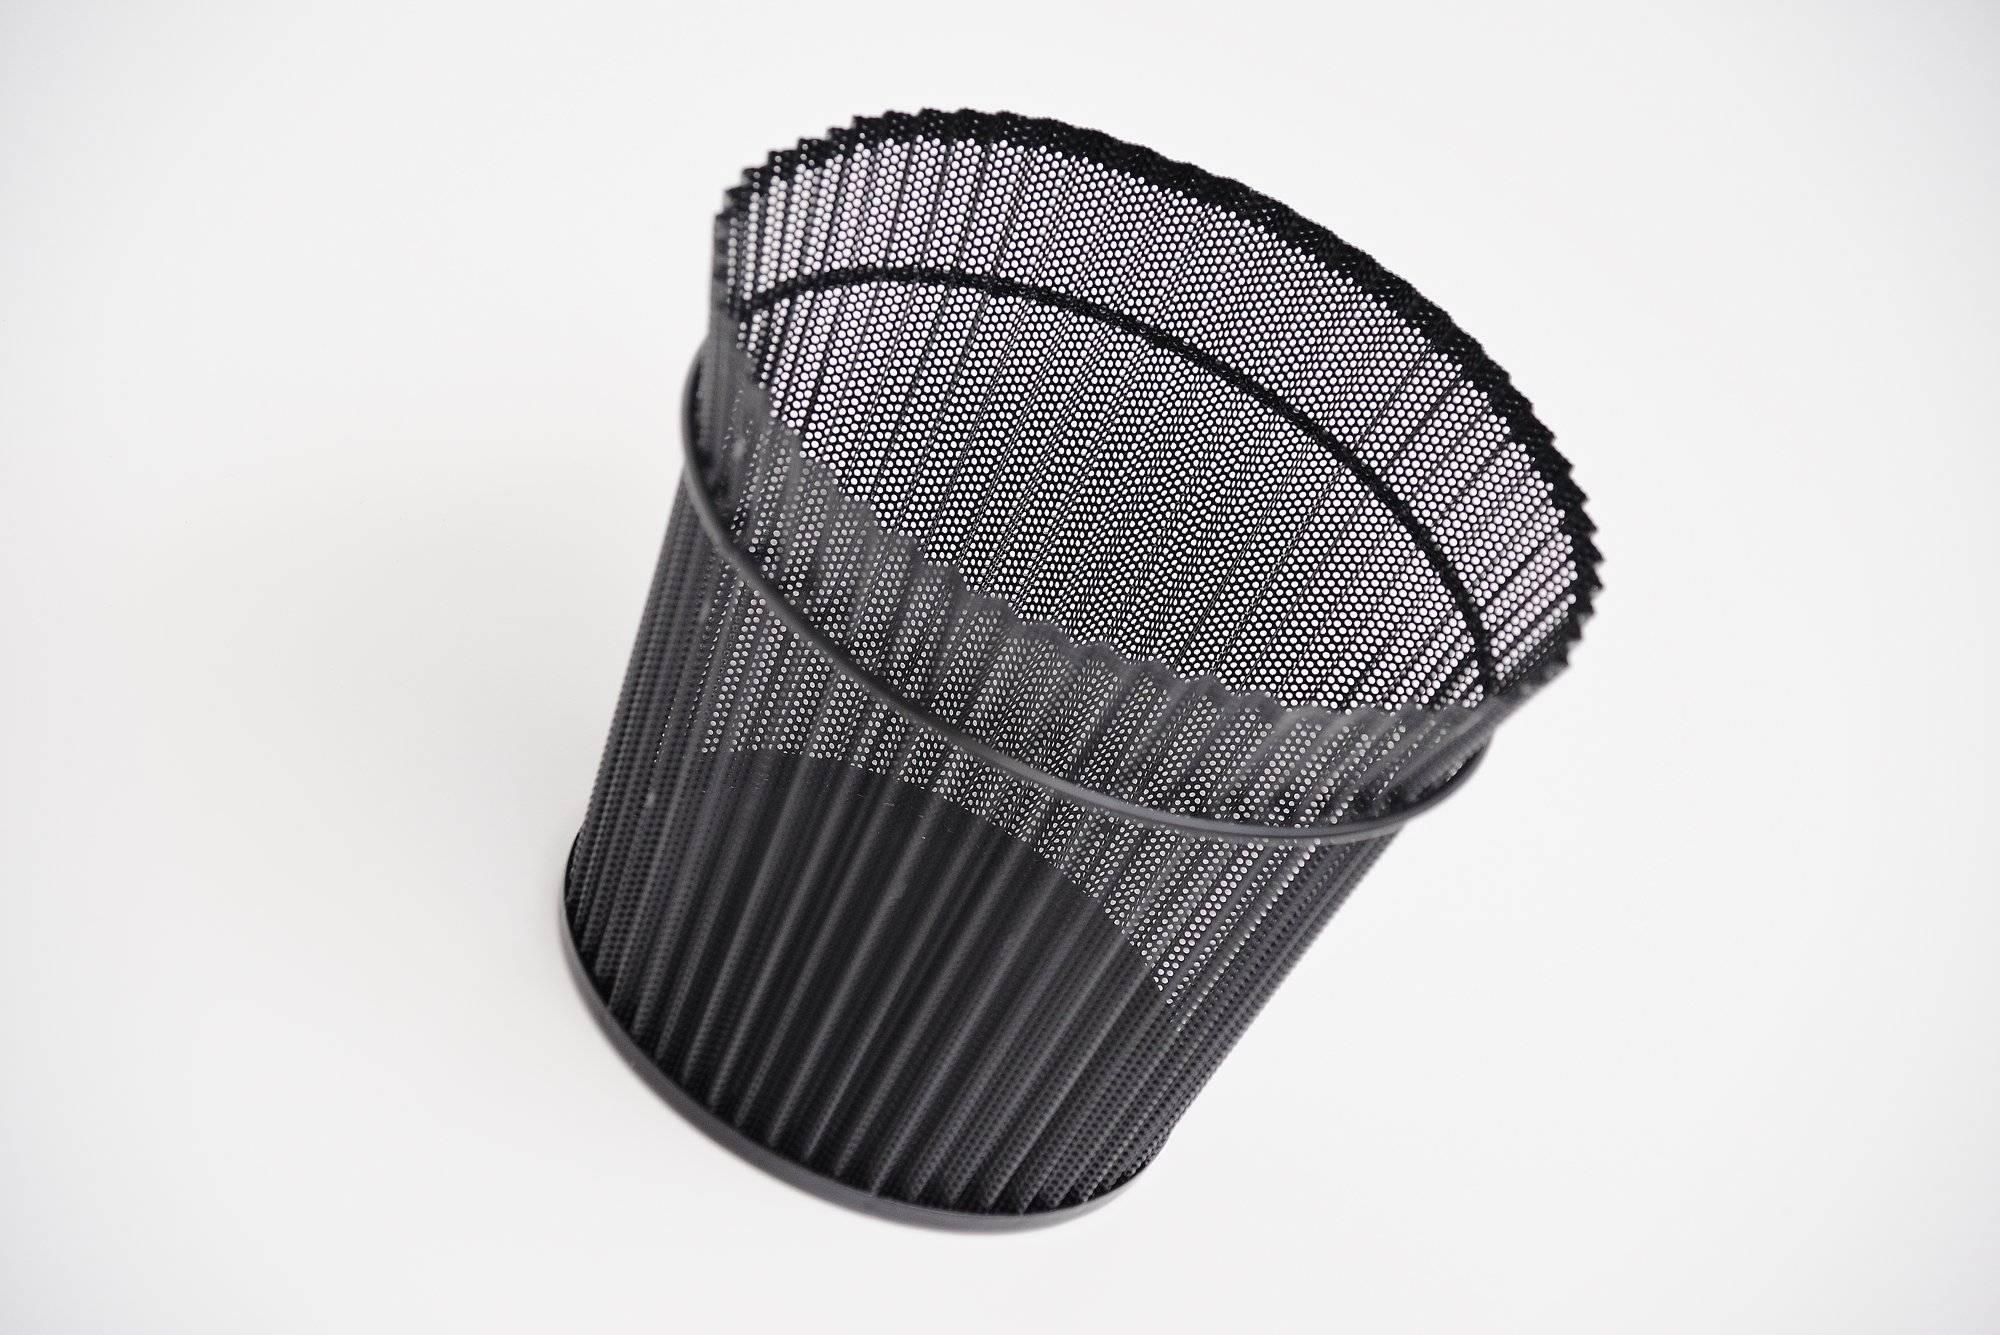 Very nice folded black metal basket designed by Mathieu Mategot for Artimeta Soest 1955. A lot of people still doubt some items really are Mategot, but during the 1950s Mategot sold some rights to Artimeta to produce some products as Artimeta